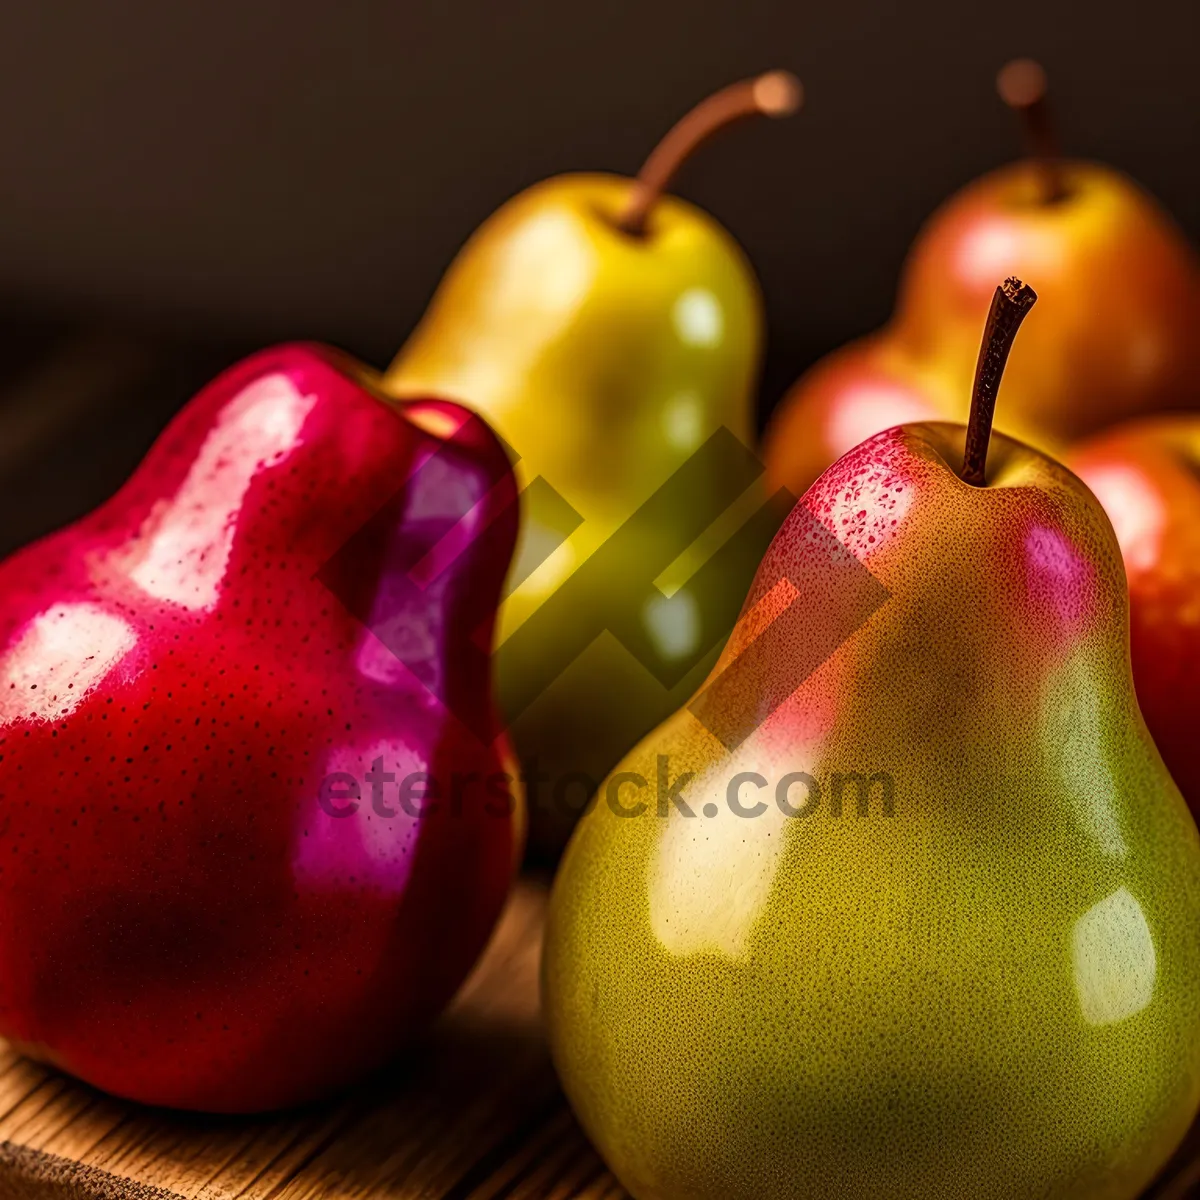 Picture of Ripe pear and apple - fresh and healthy!